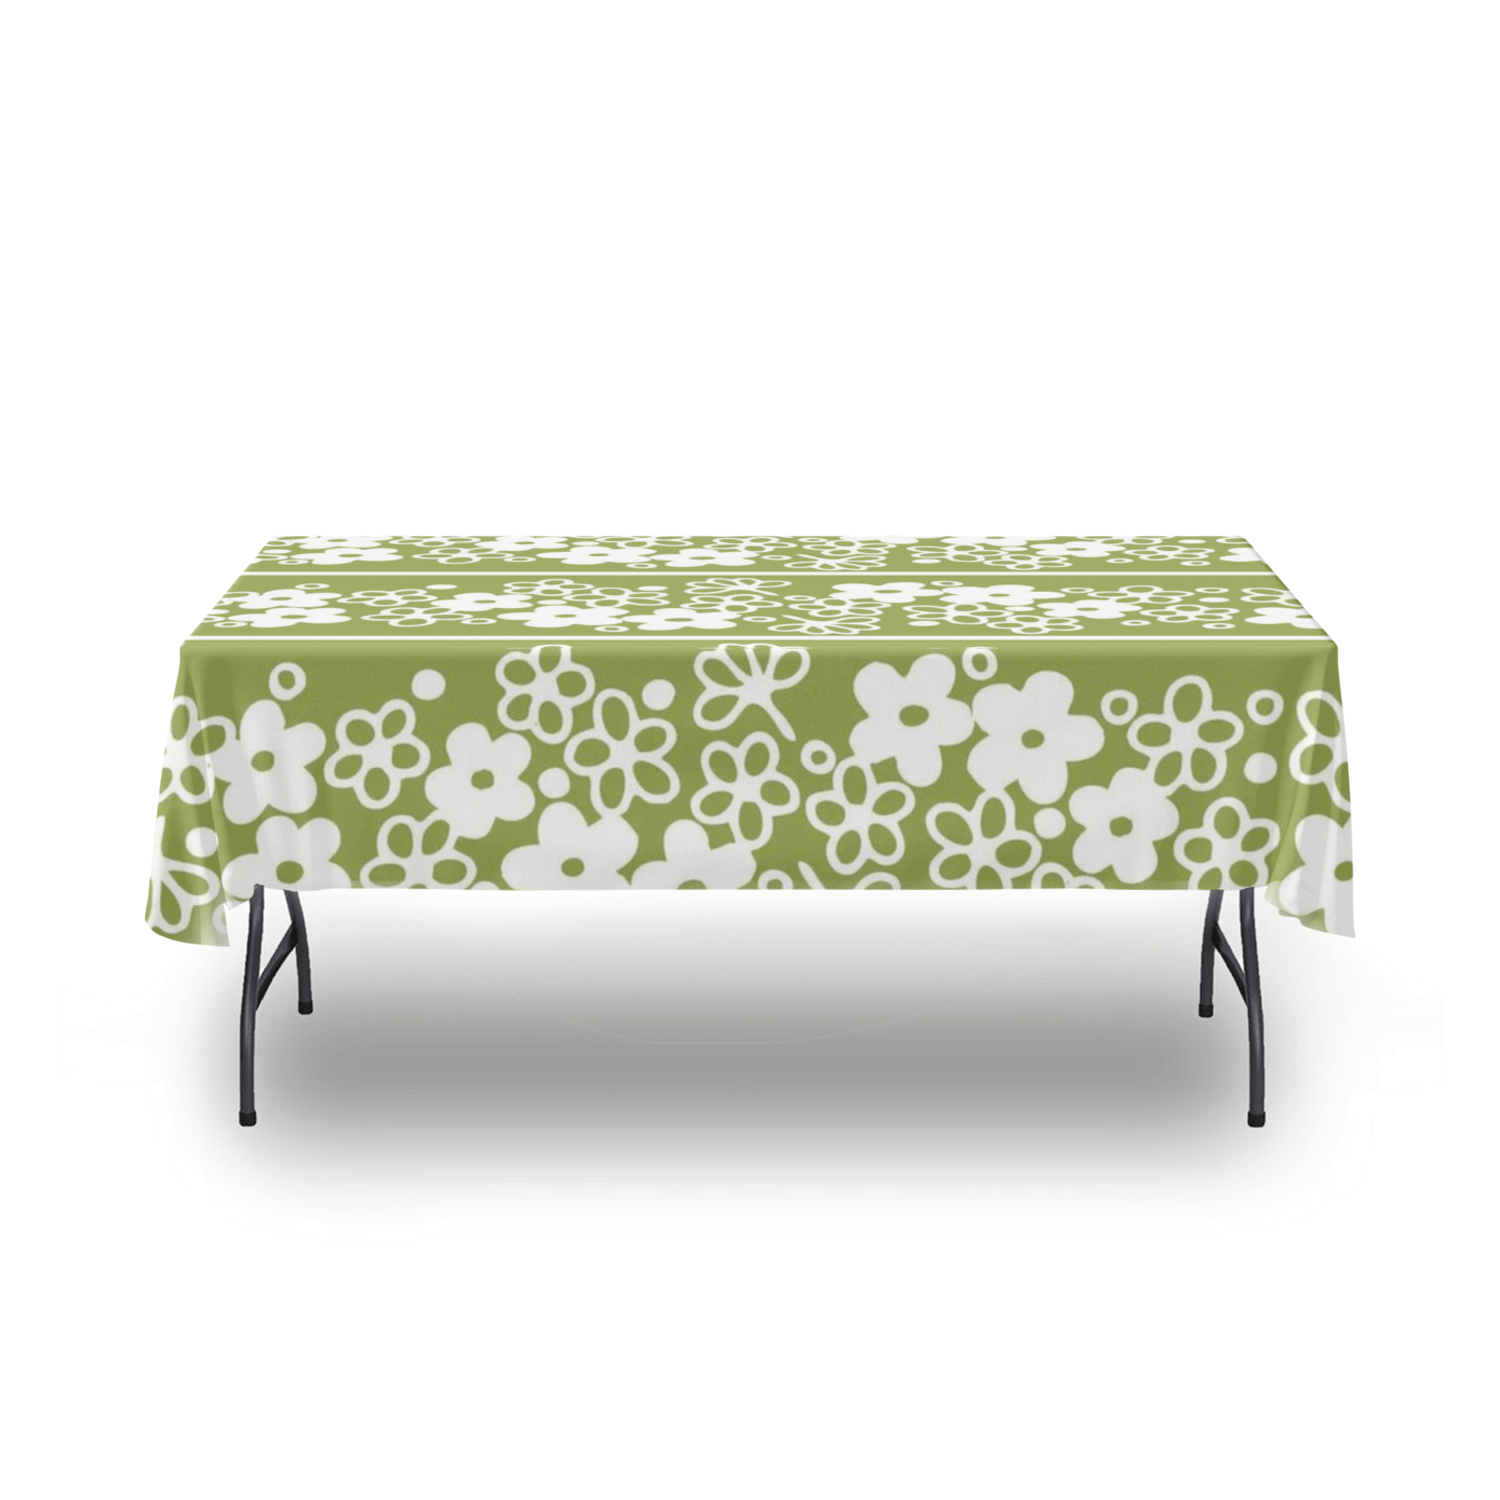 Retro Green, Spring Blossom, Pyrex Lover, Mod Daisy MCM Tablecloth tablecloth 54&quot; x 54&quot;